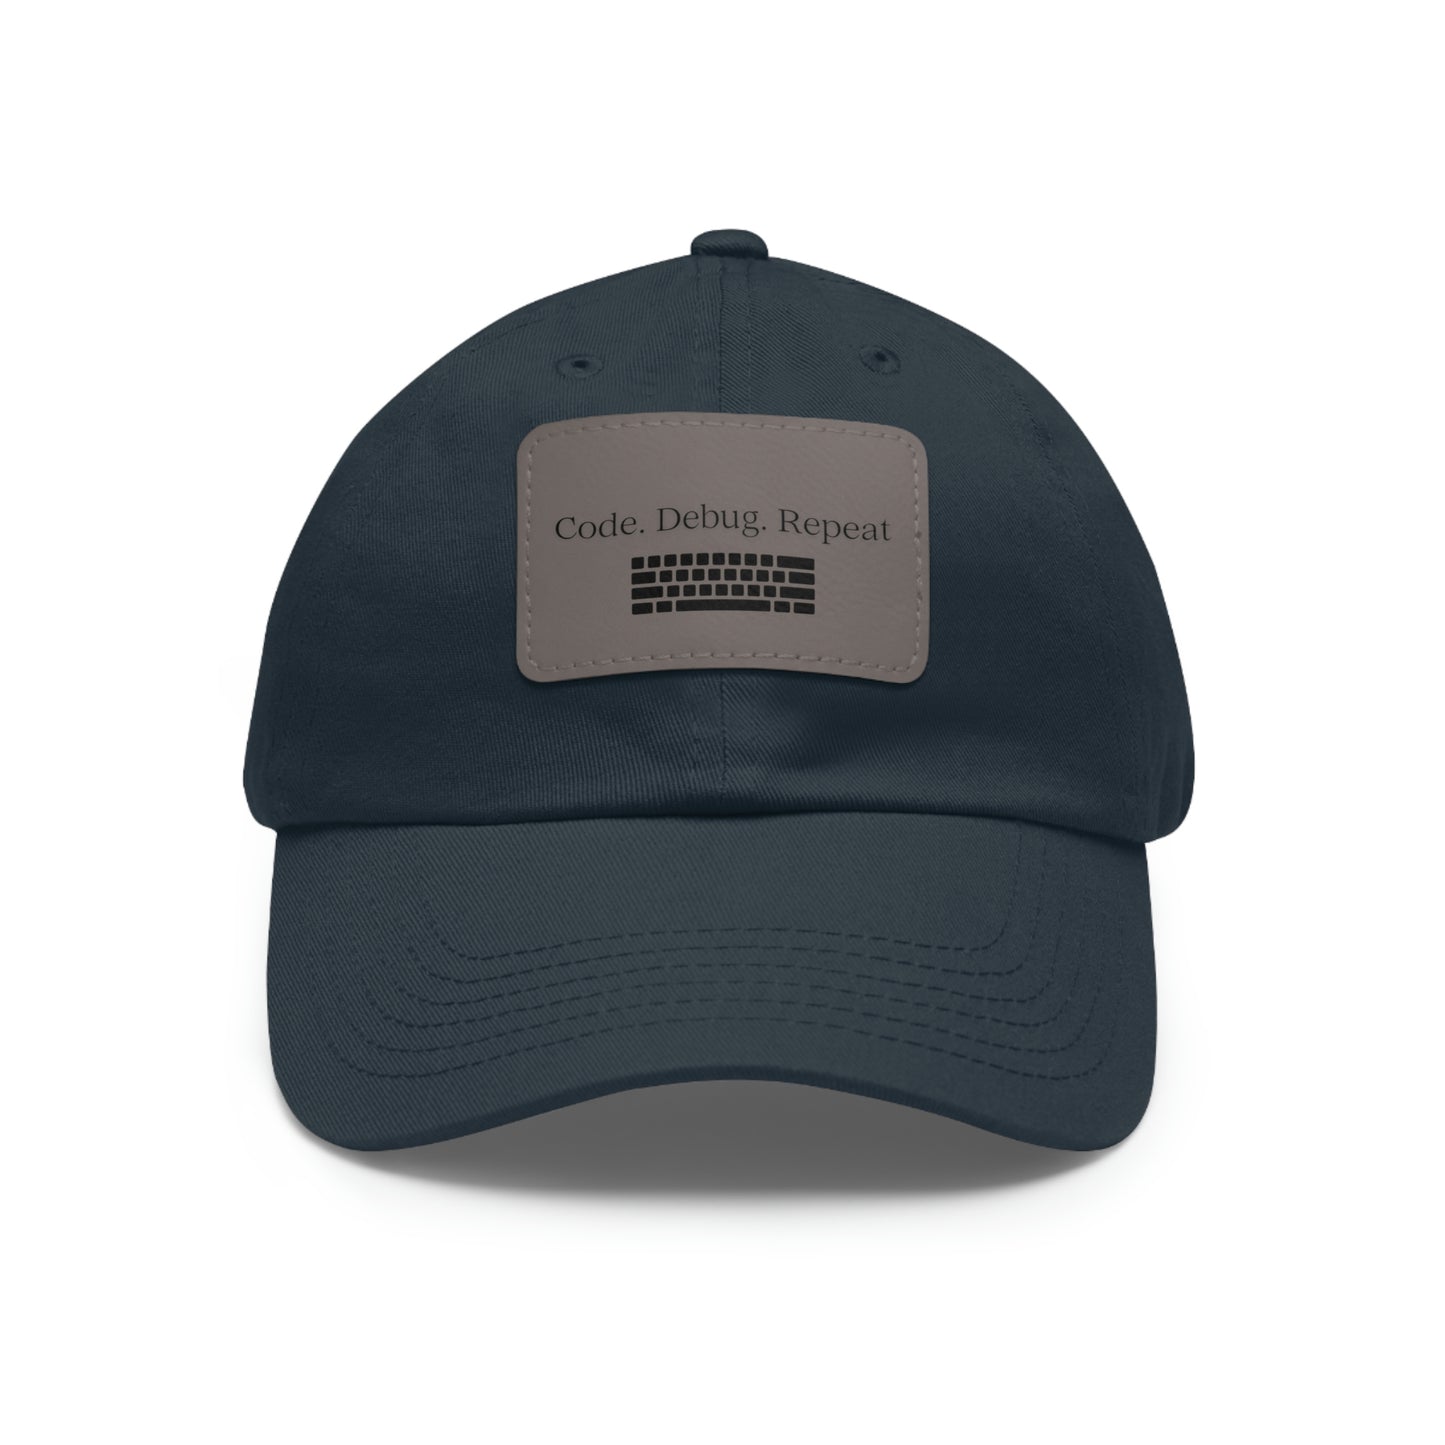 Hat for Code.Debug.Repeat Leather Patch Hat: Perfect for Tech Enthusiasts Baseball Hat Gift